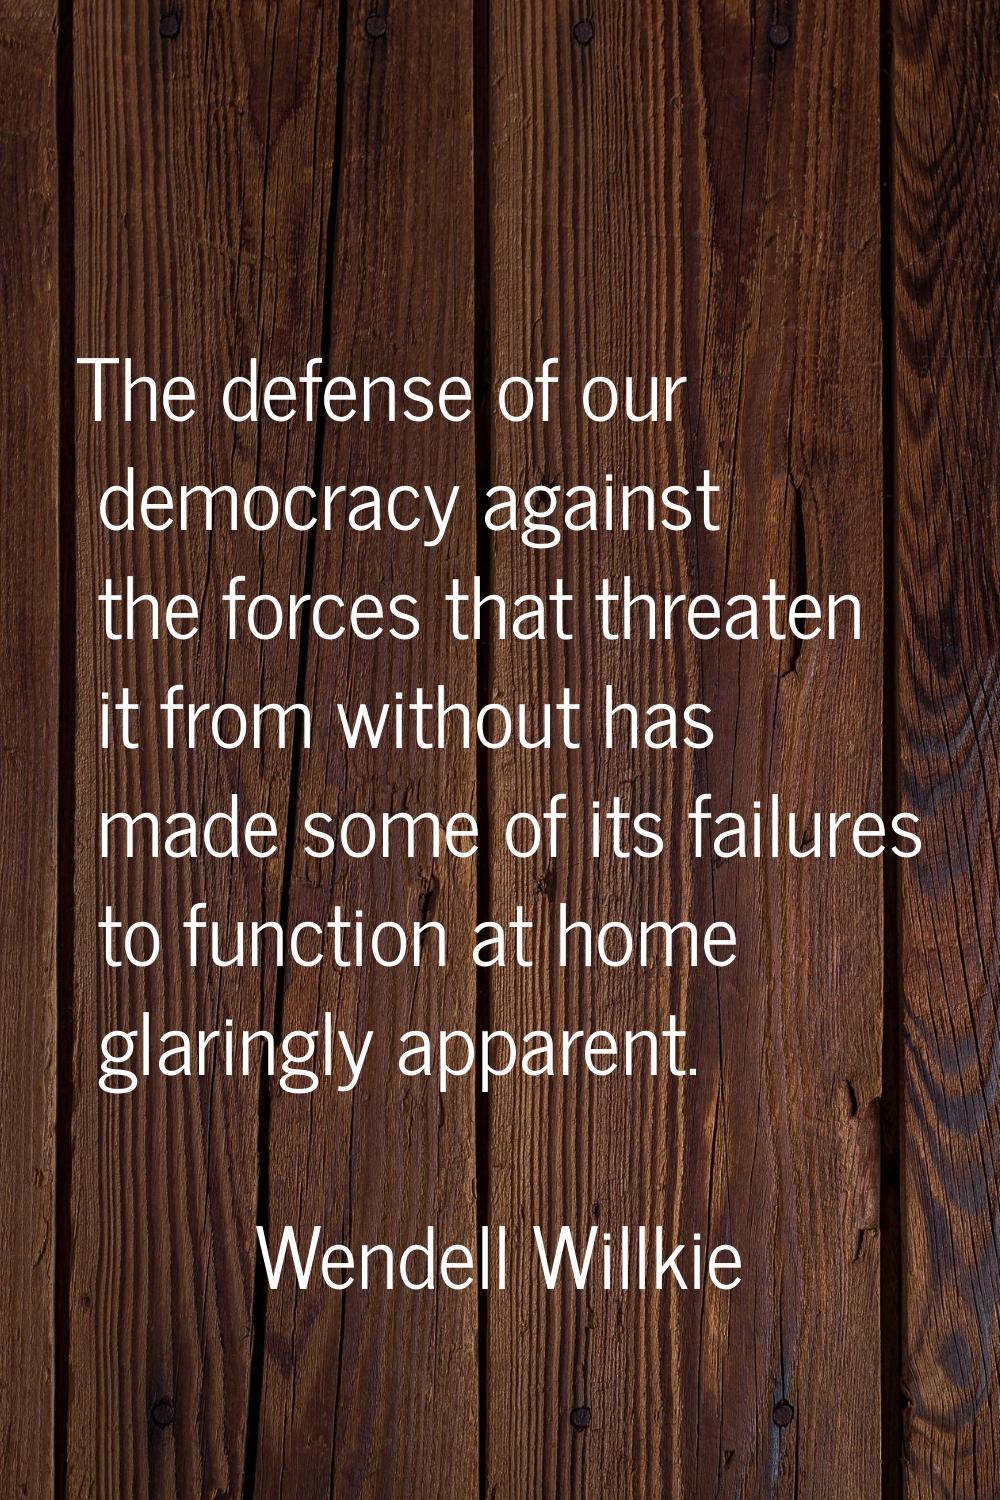 The defense of our democracy against the forces that threaten it from without has made some of its 